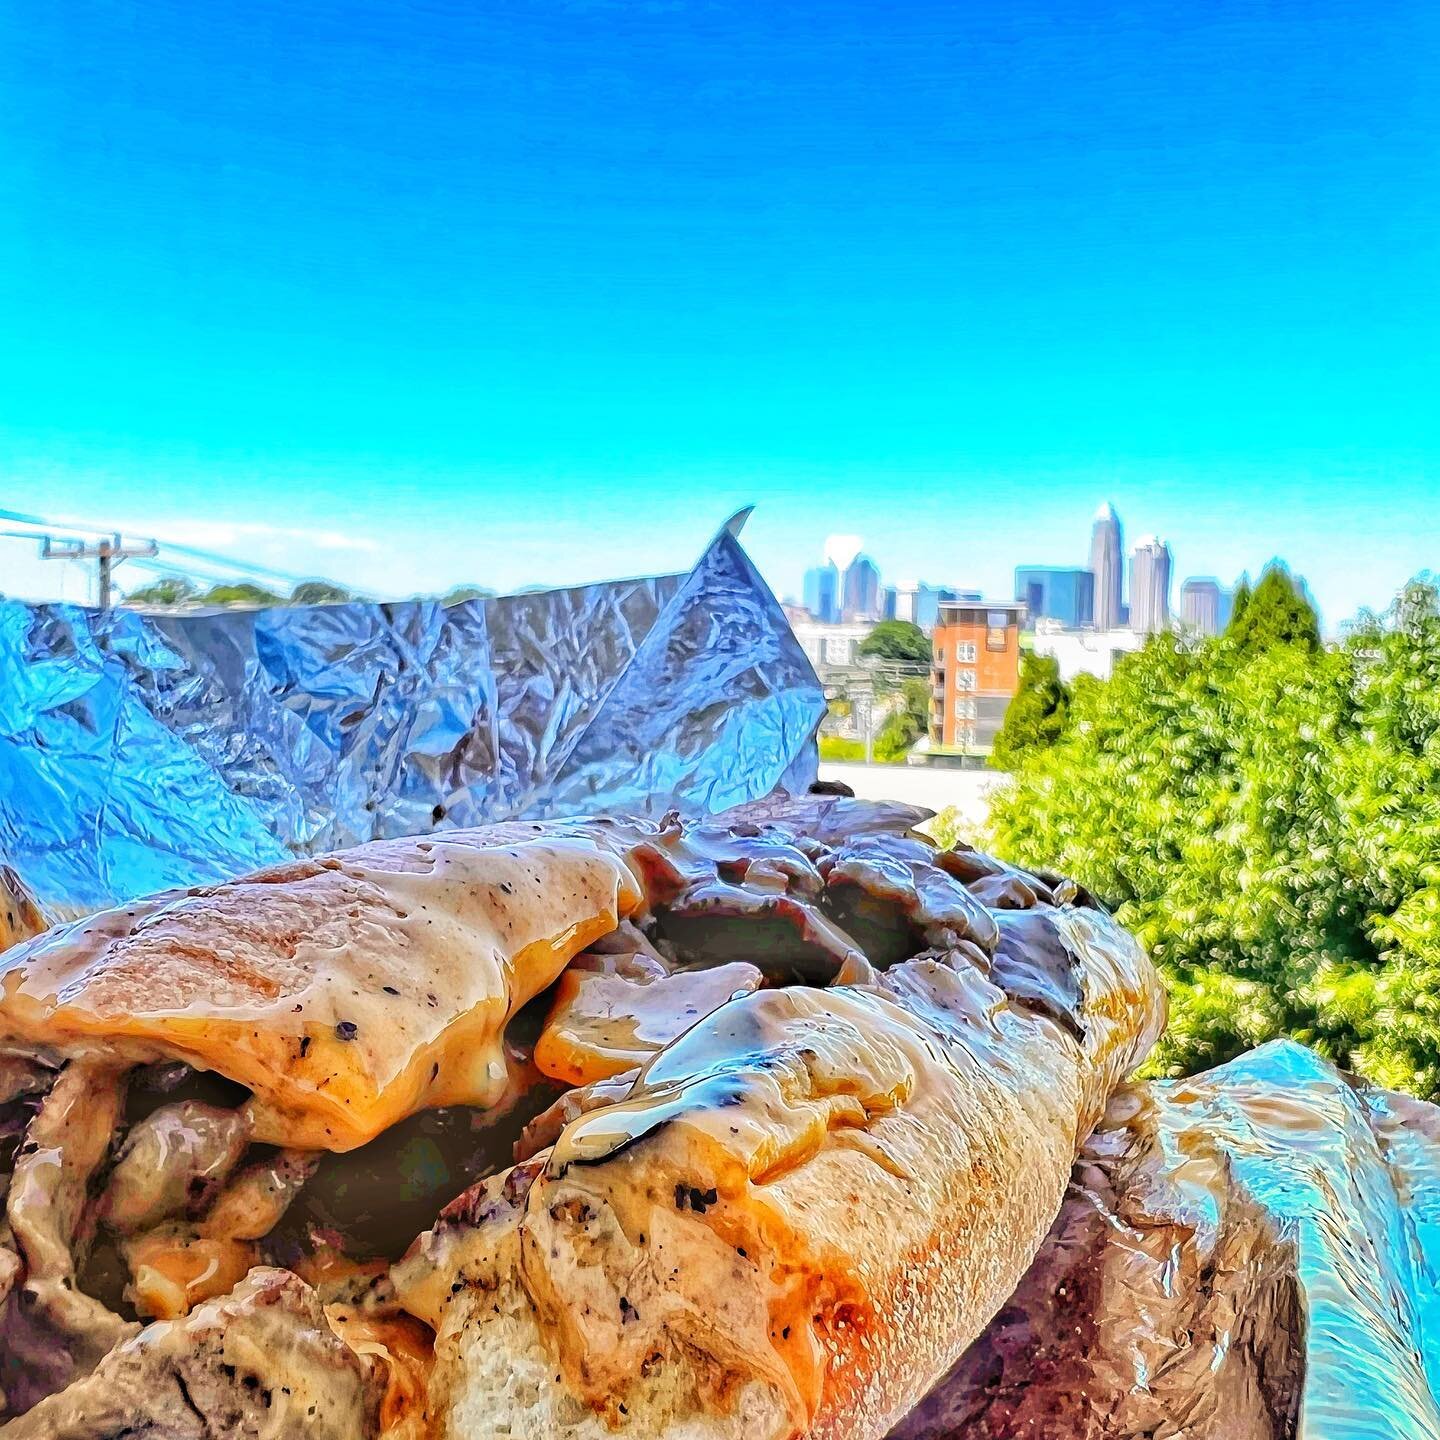 She is beauty, she is grace, she is @cheatscheesesteaks 

#charlotte #food #yum #foryou #discover  #foryoupage #cheesesteak #clt #cltfoodie #cltfood